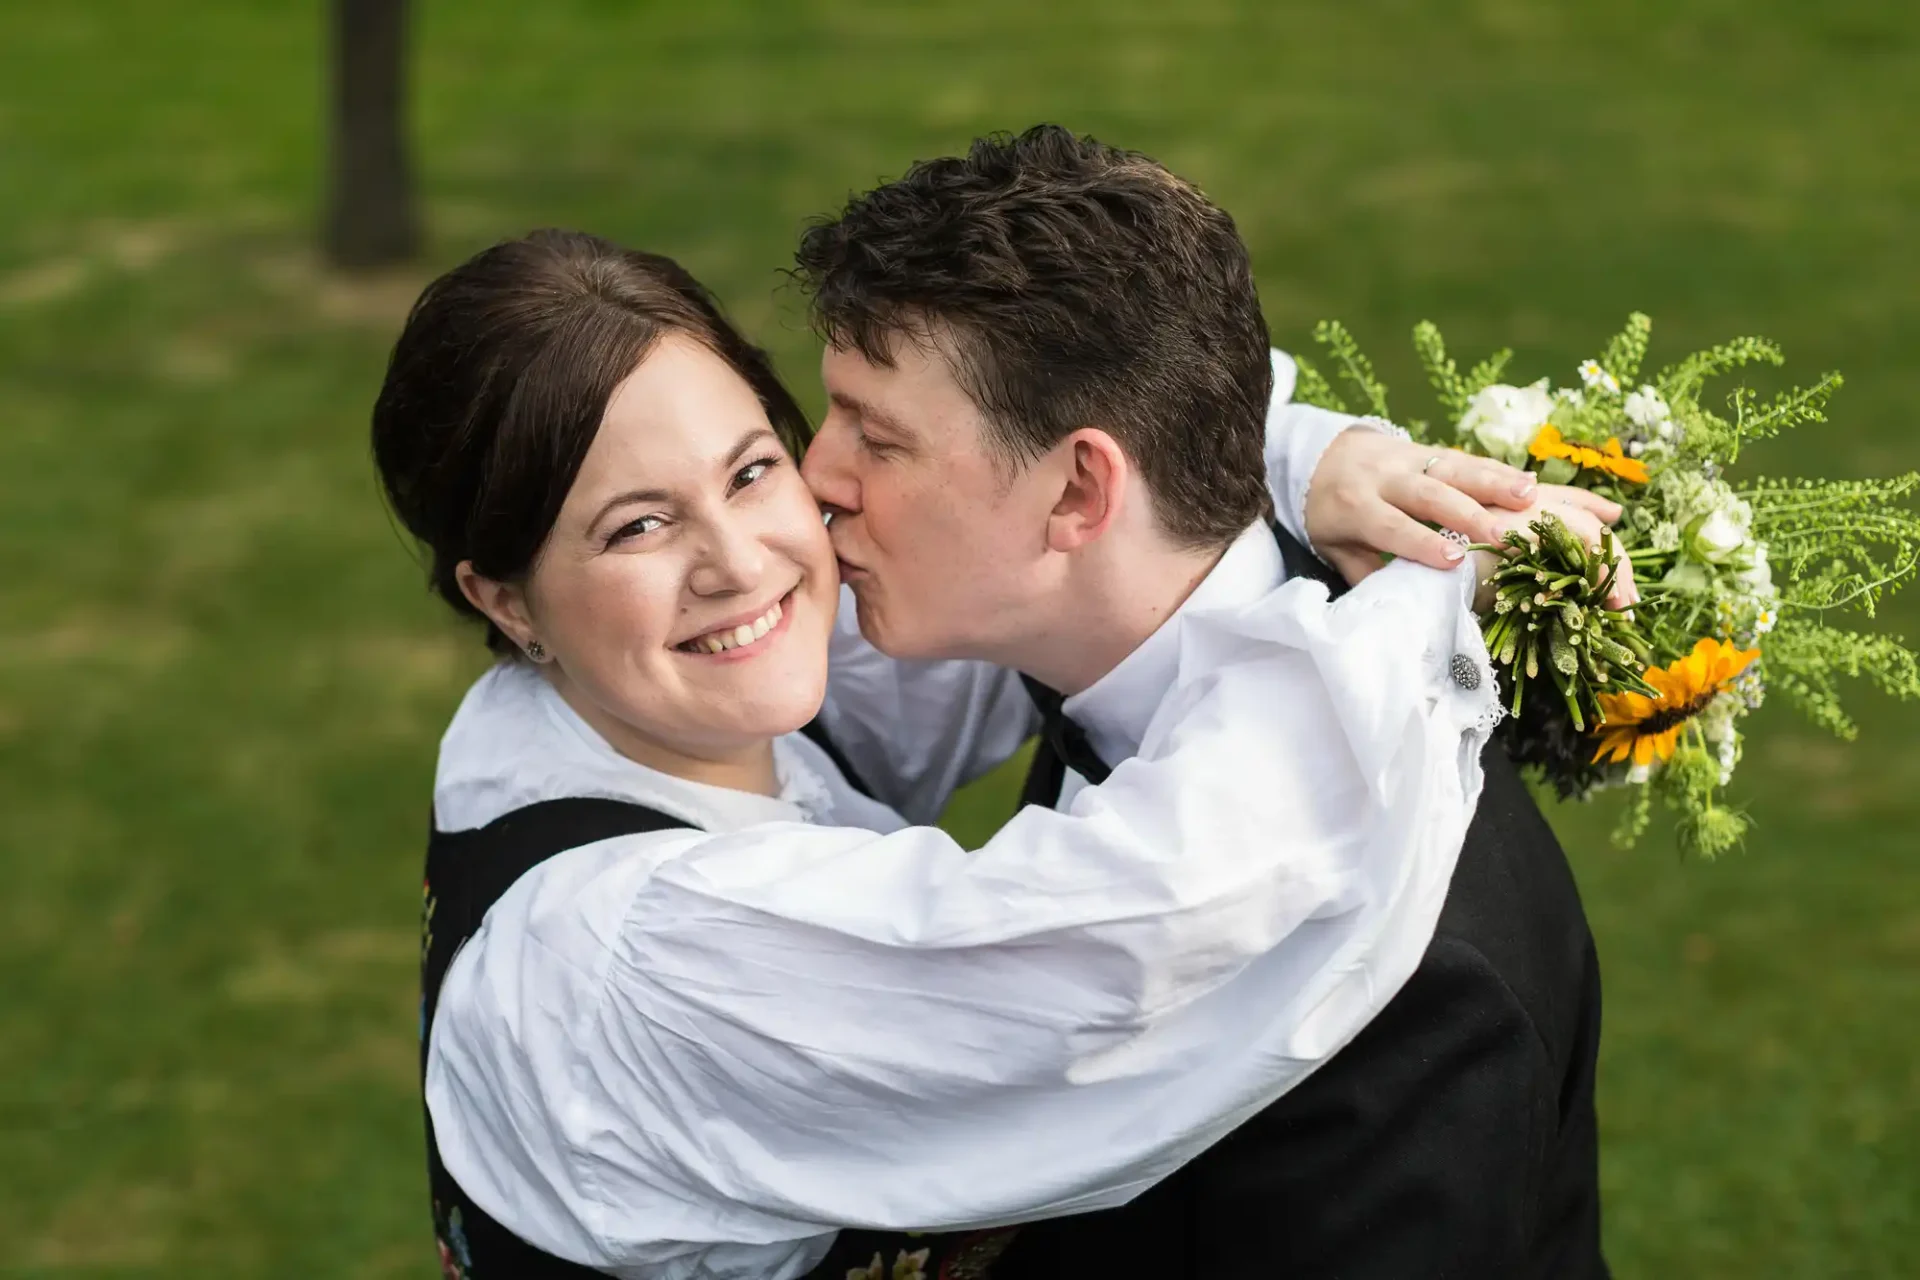 A couple in traditional attire embracing and smiling at a wedding, with the groom kissing the bride on the cheek.